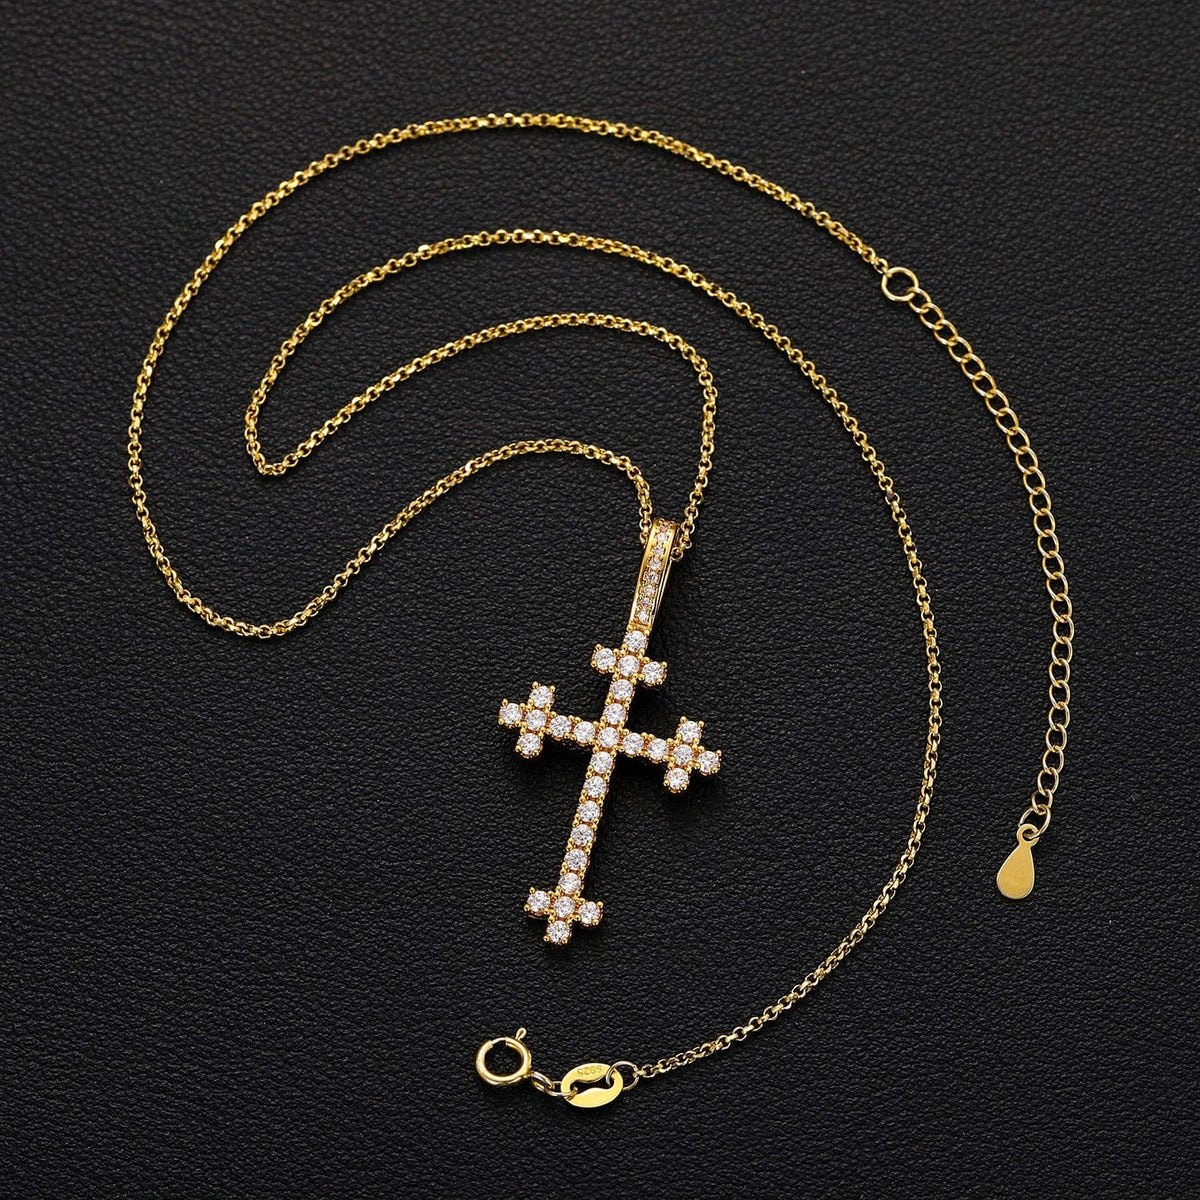 Pave Crossiet Pendant Necklace - Cornerstone Jewellery Gold / With 925 Chain Necklace Christian Catholic Religous fine Jewelry